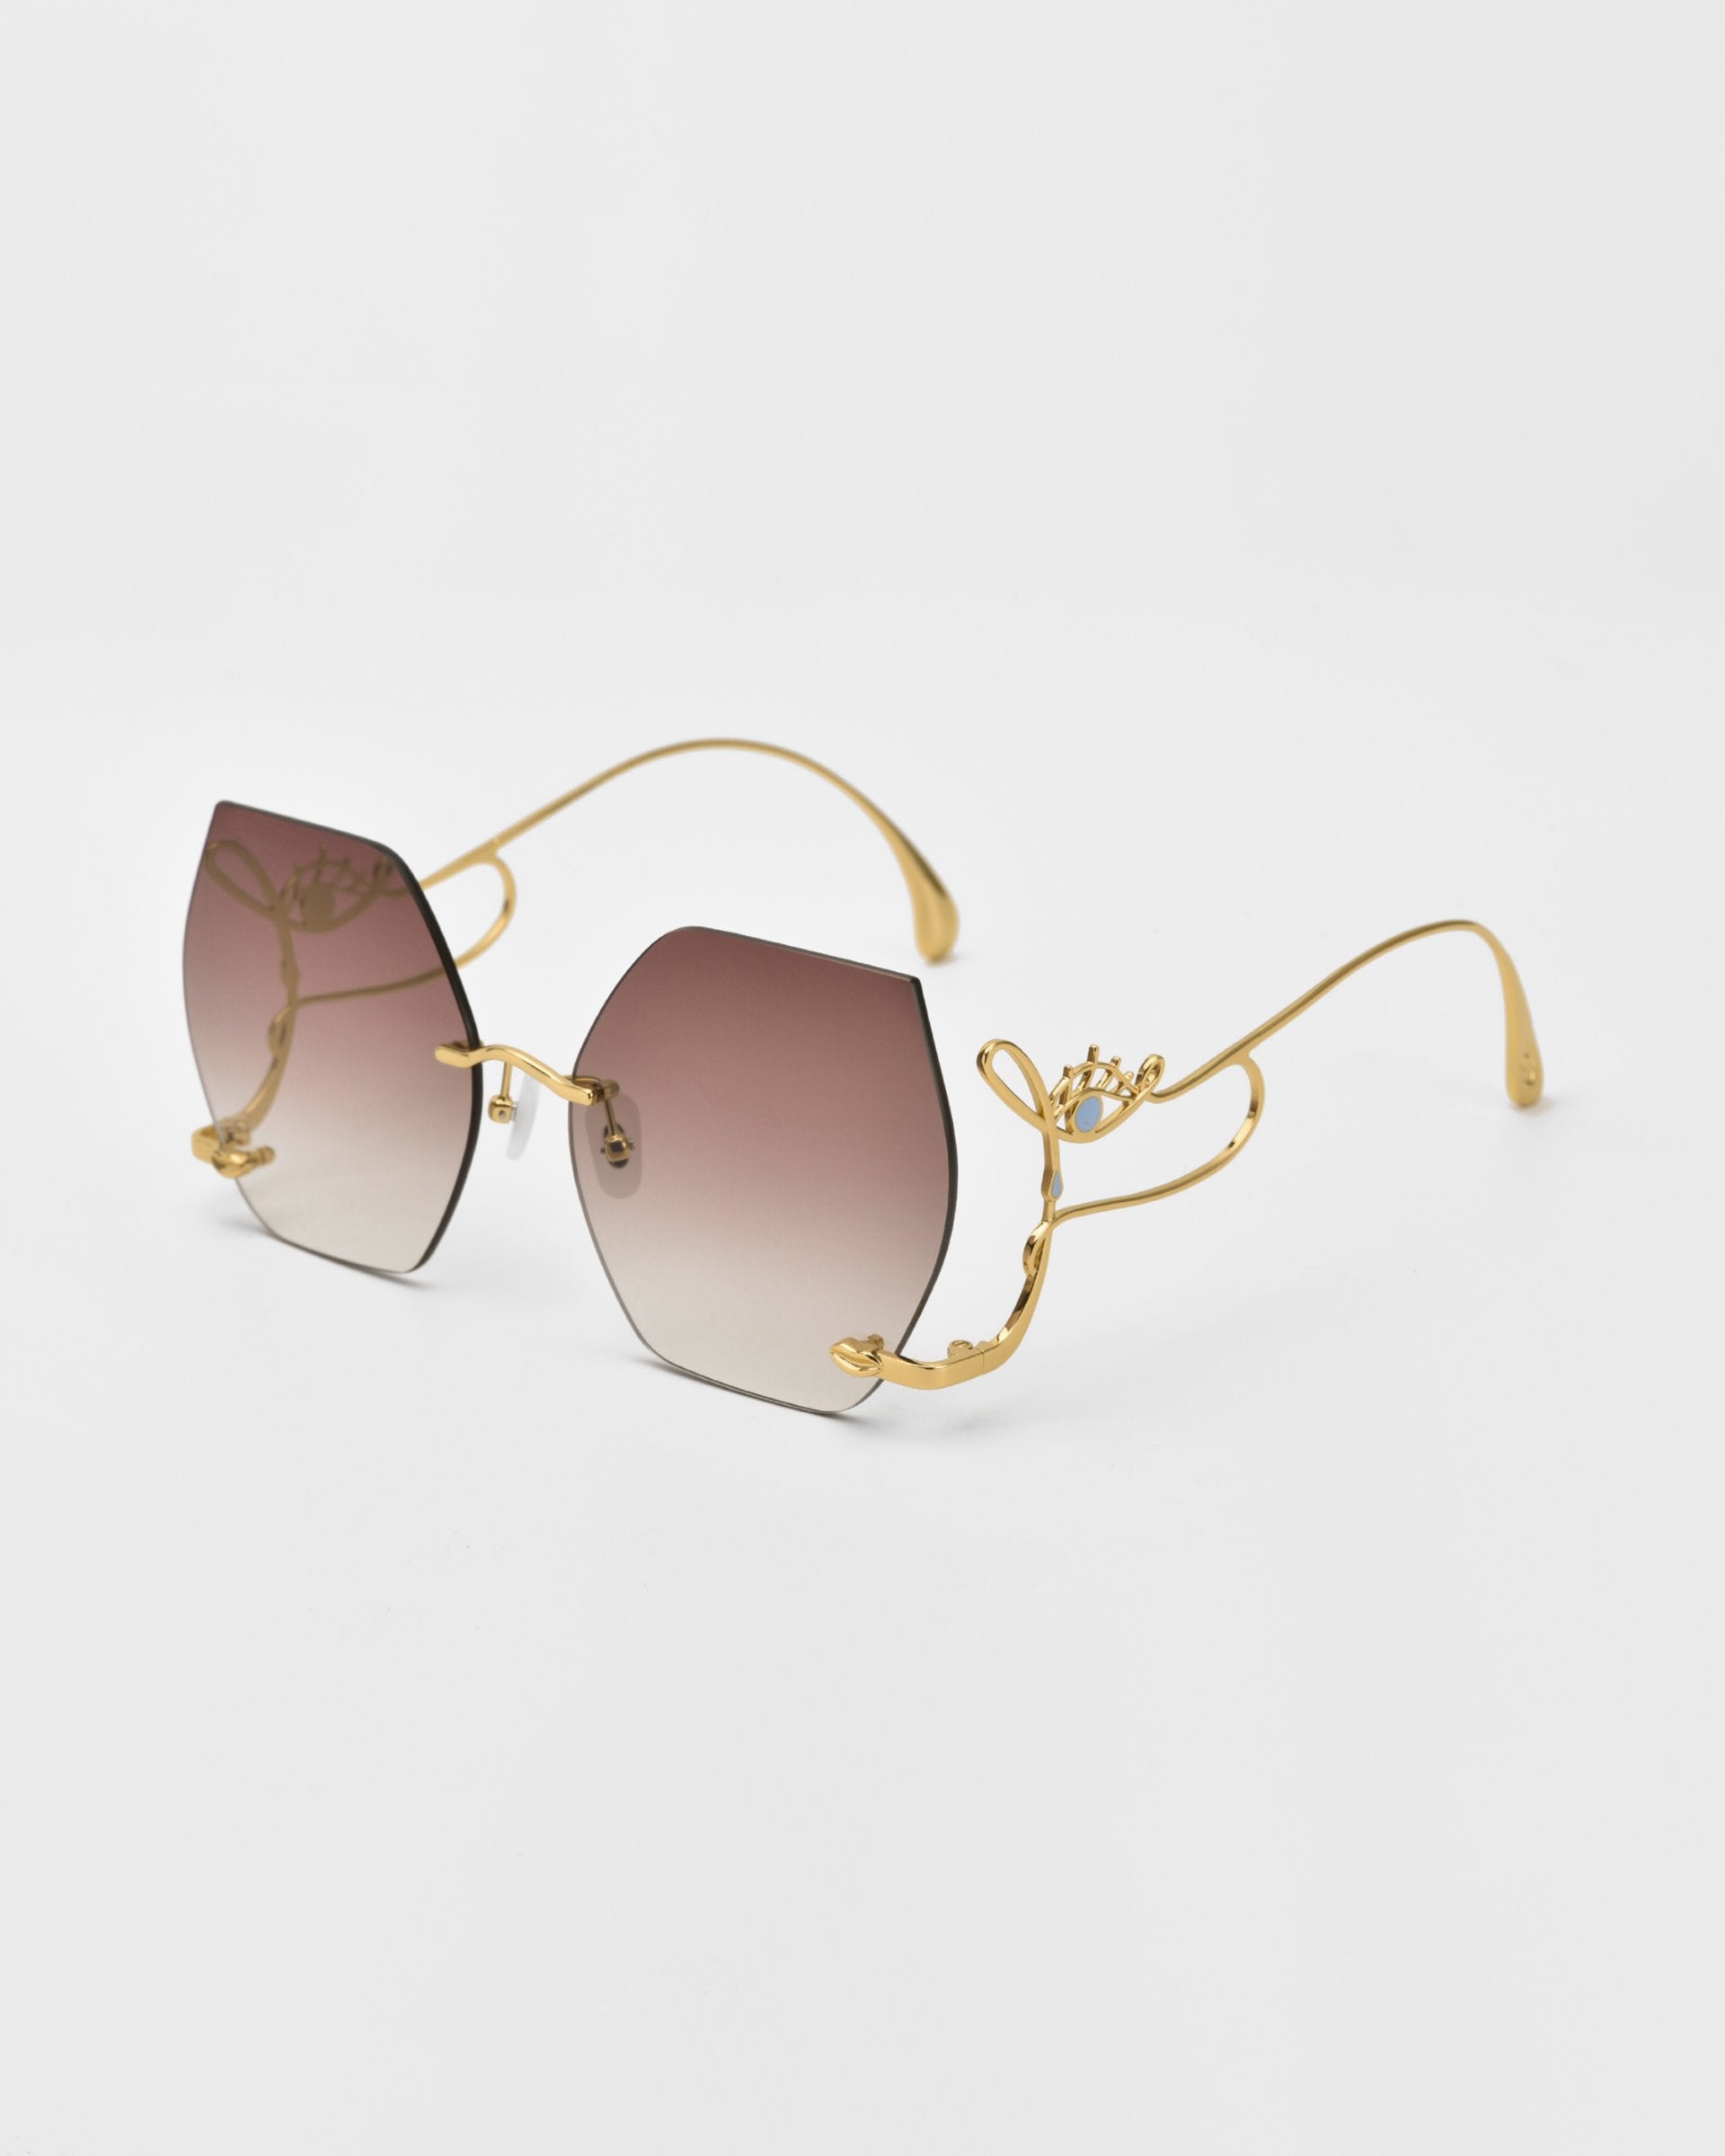 A pair of stylish, limited edition Cry Me a River sunglasses by For Art&#39;s Sake® with gradient brown lenses and intricate gold frames. The unique frame design features delicate, floral-like embellishments on the arms, providing a luxurious and elegant appearance against a plain white background.